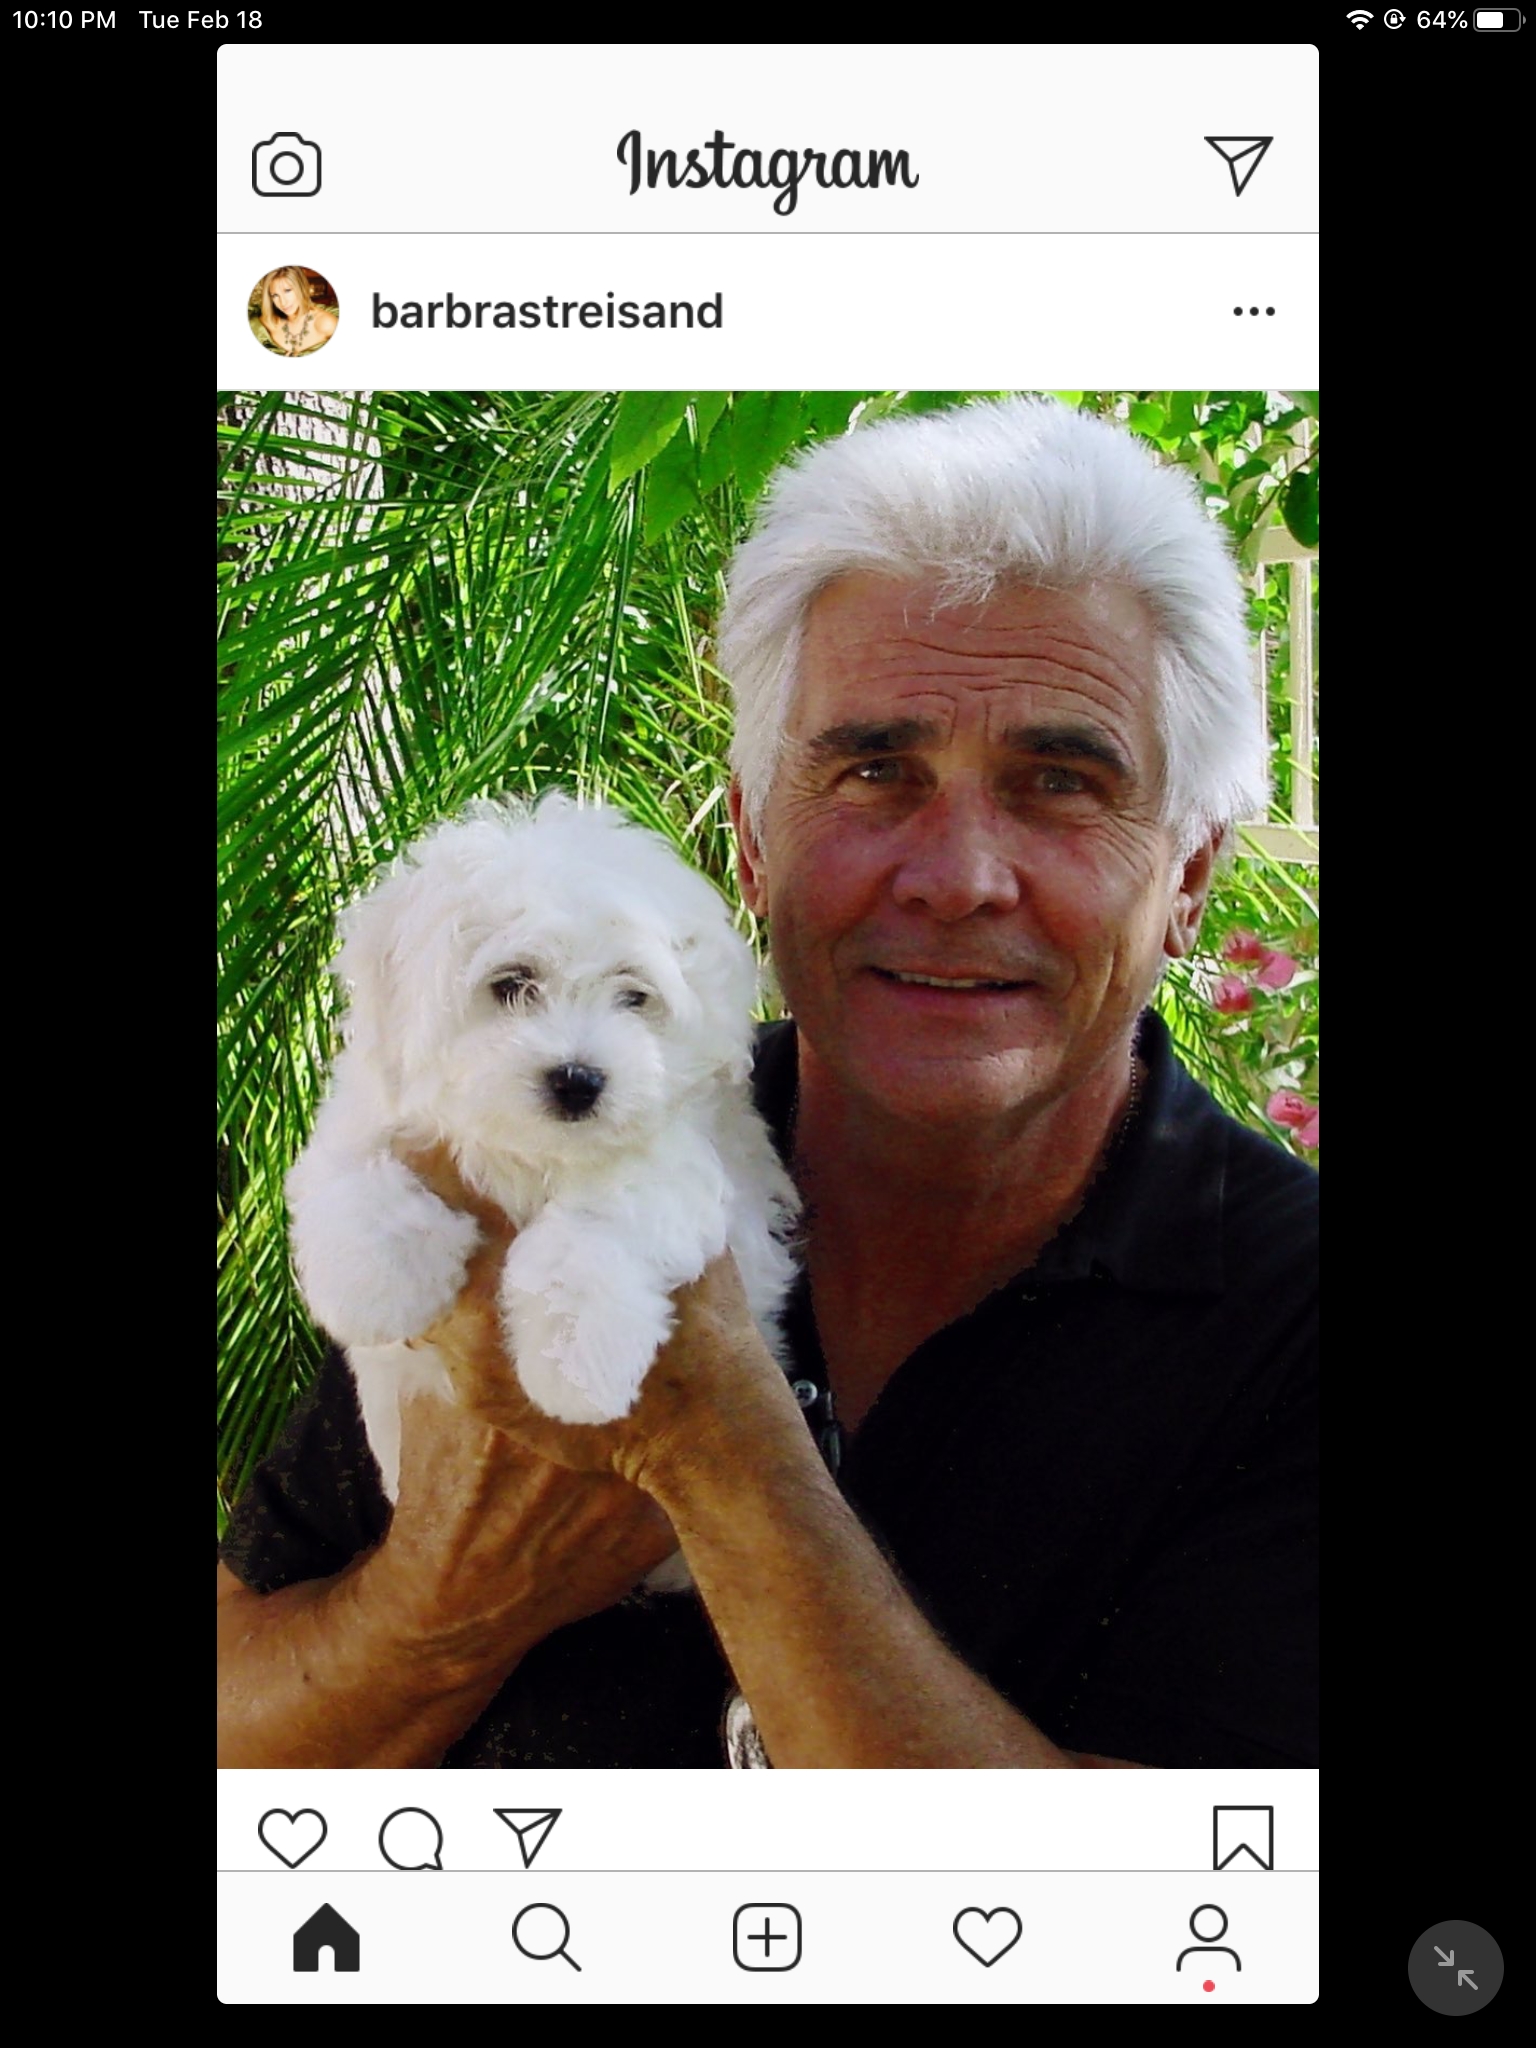 James Brolin presents wife Barbra with this canine cutie